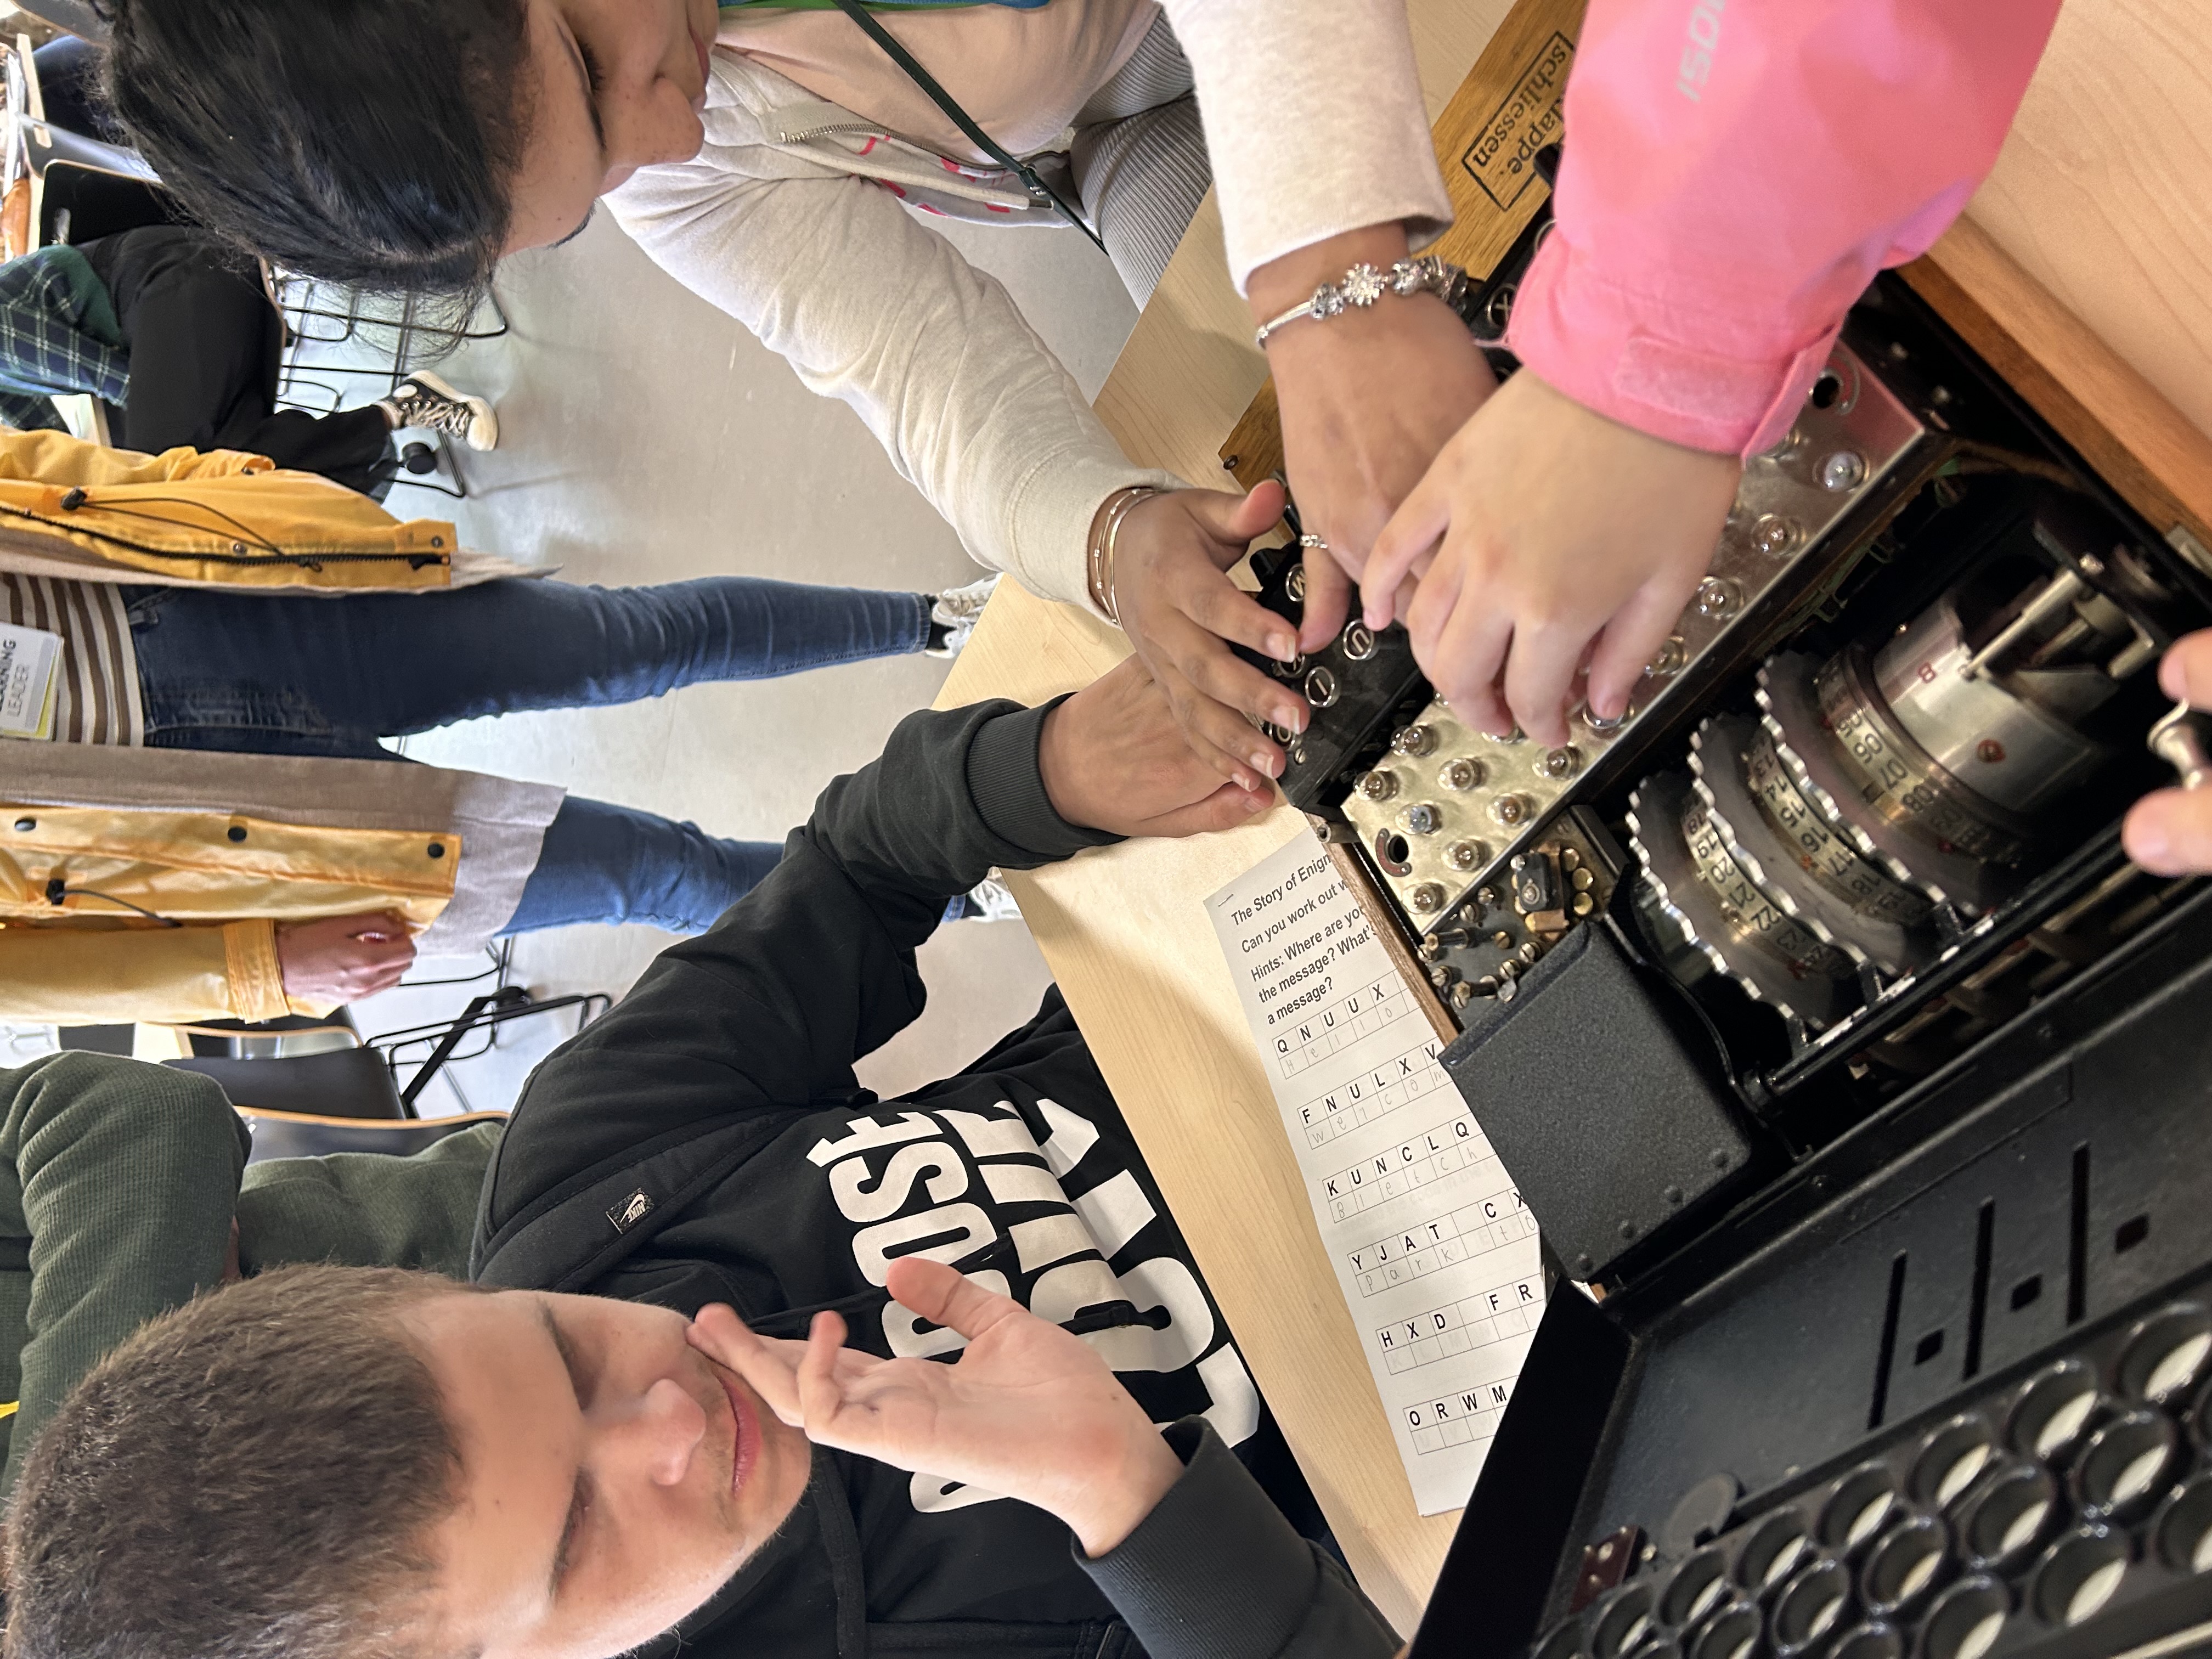 Students become Codebreakers for the day at Bletchley Park